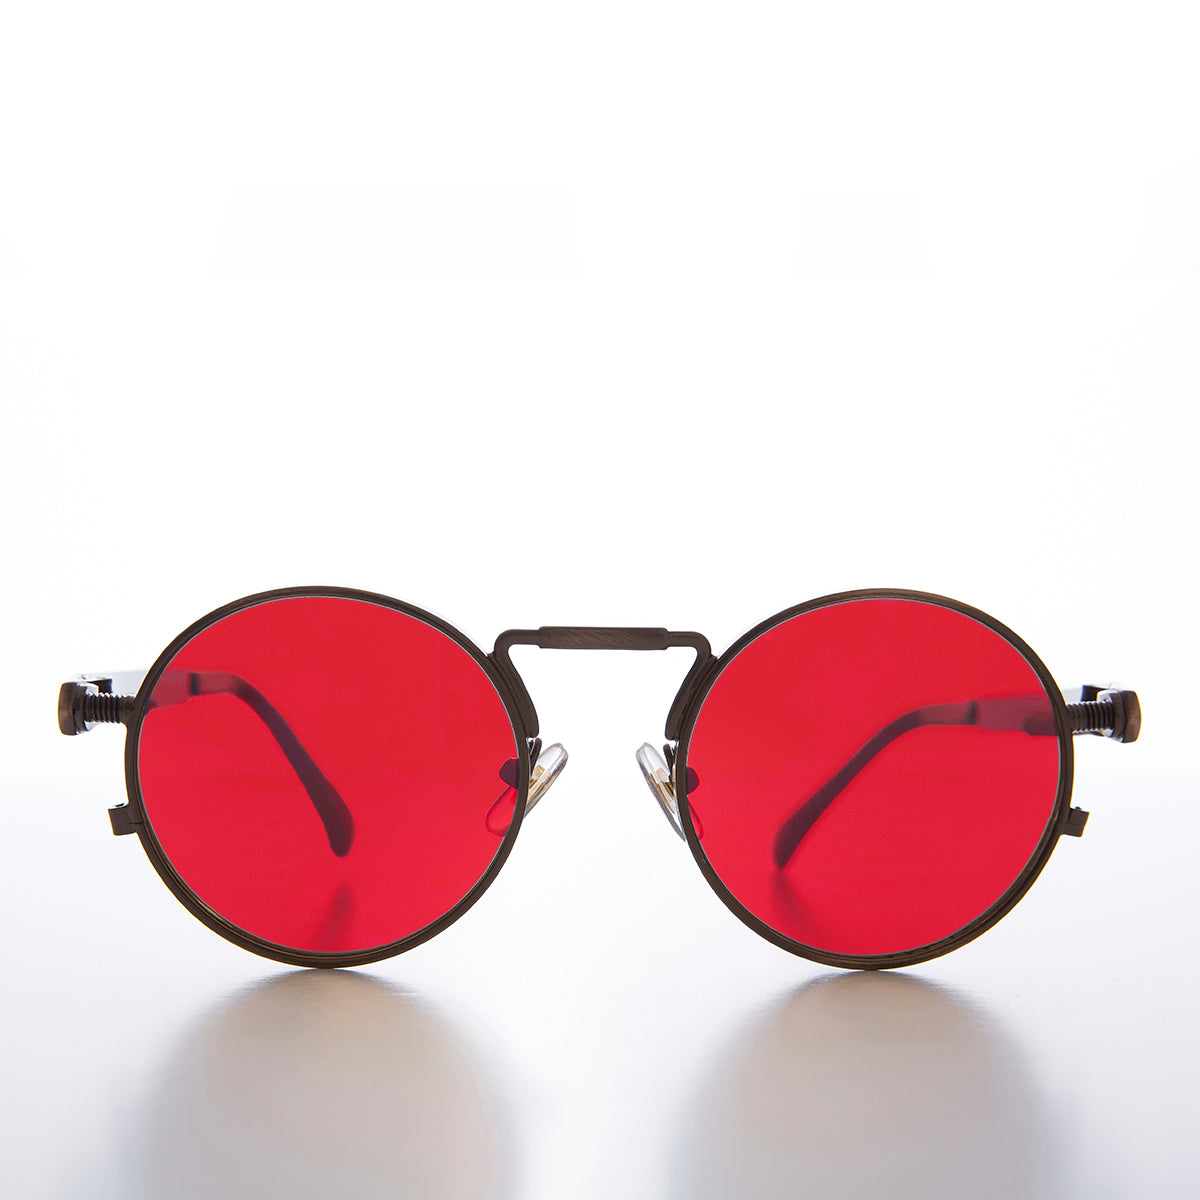 round steampunk sunglass with red lens